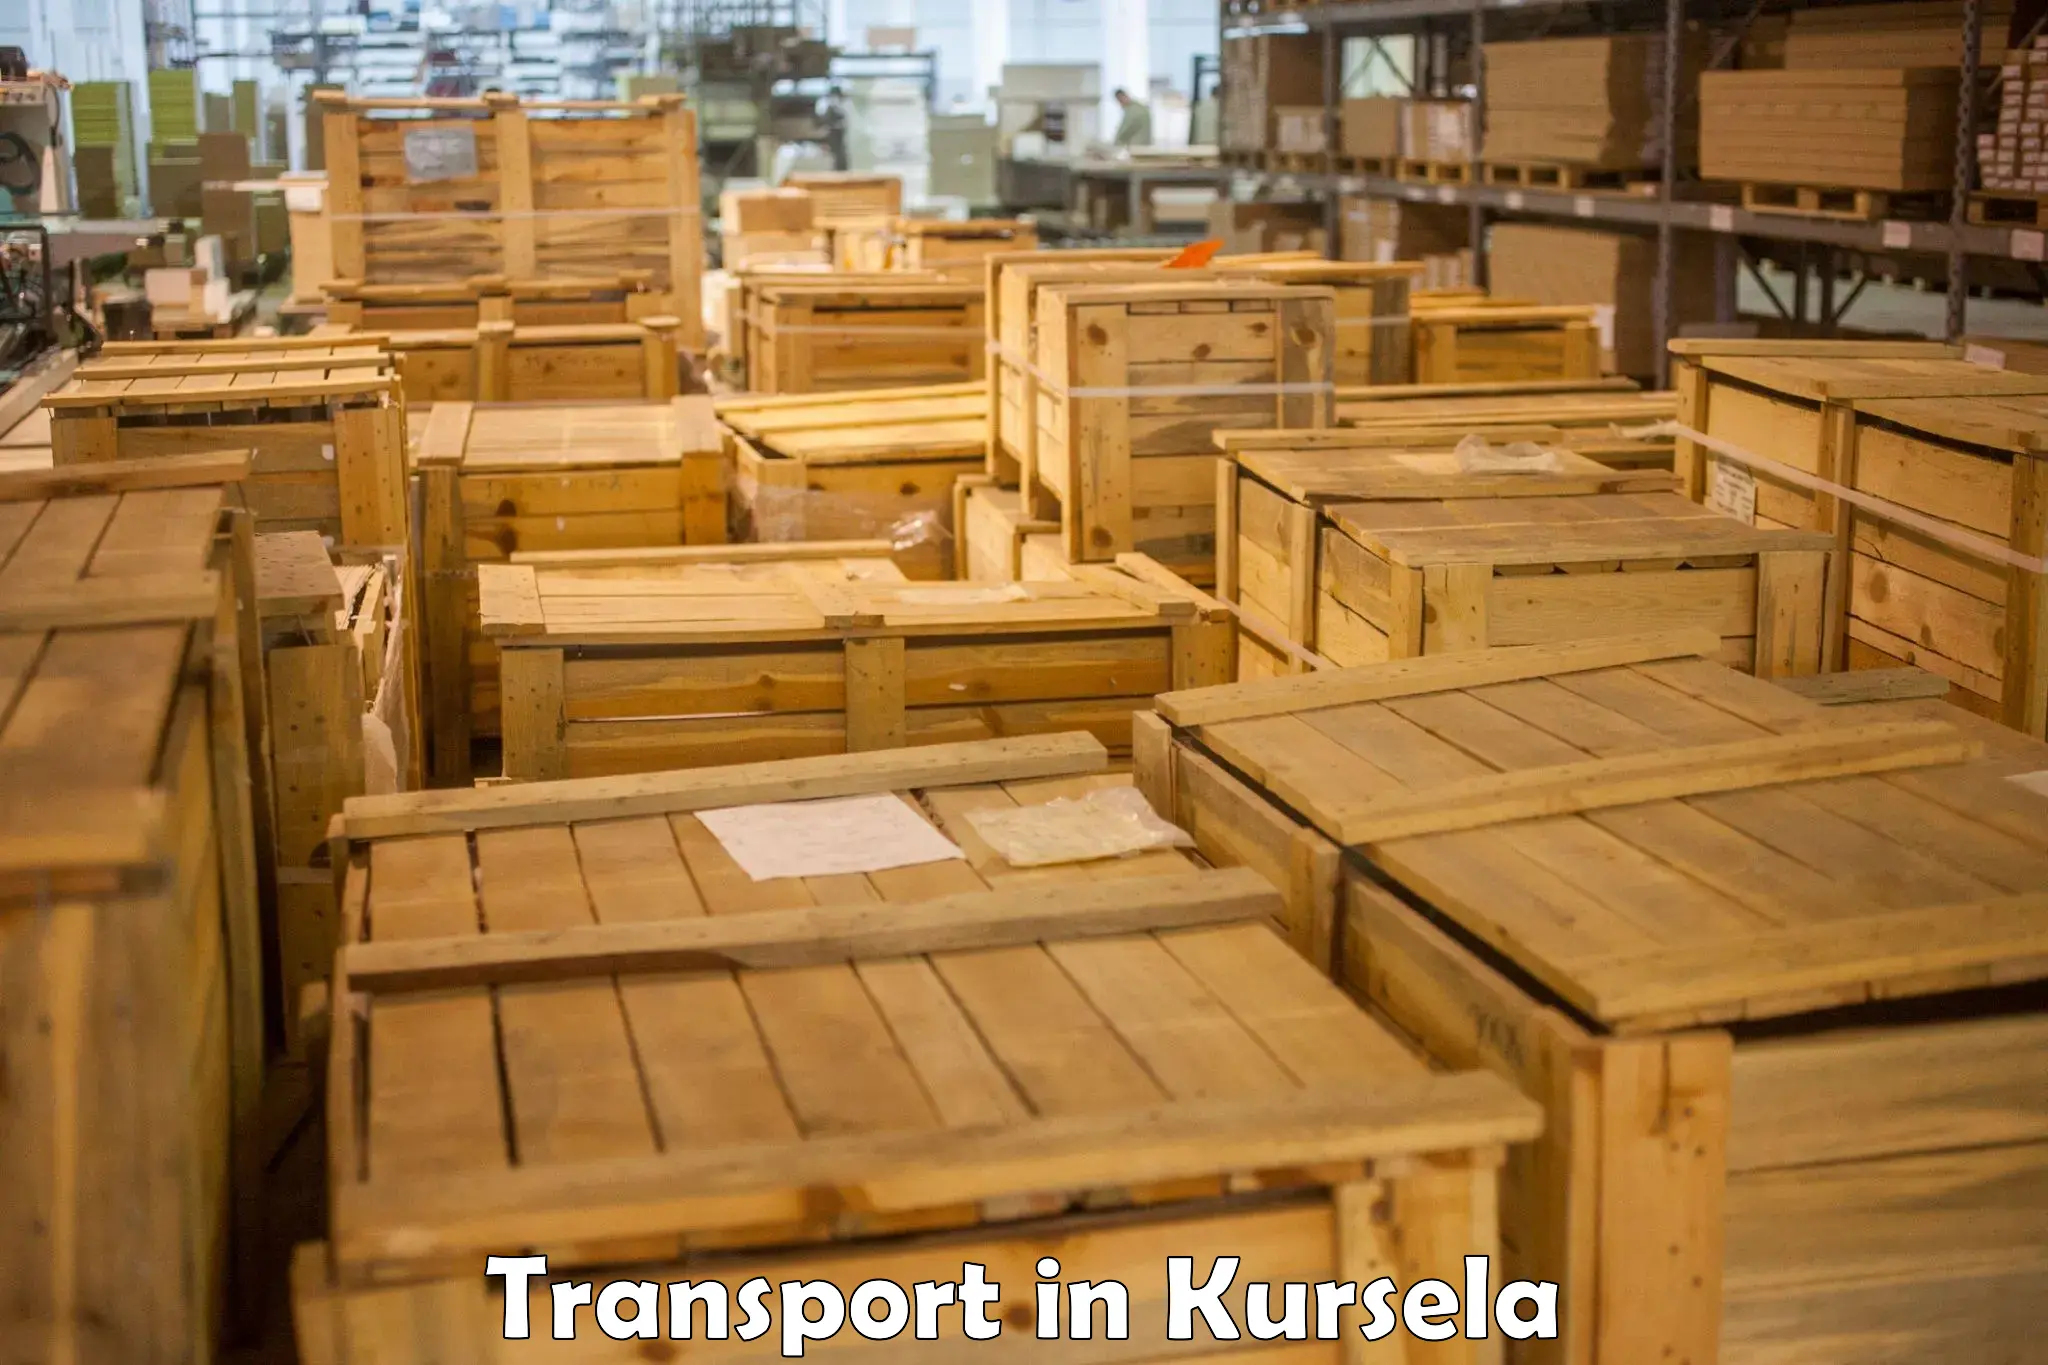 Container transport service in Kursela